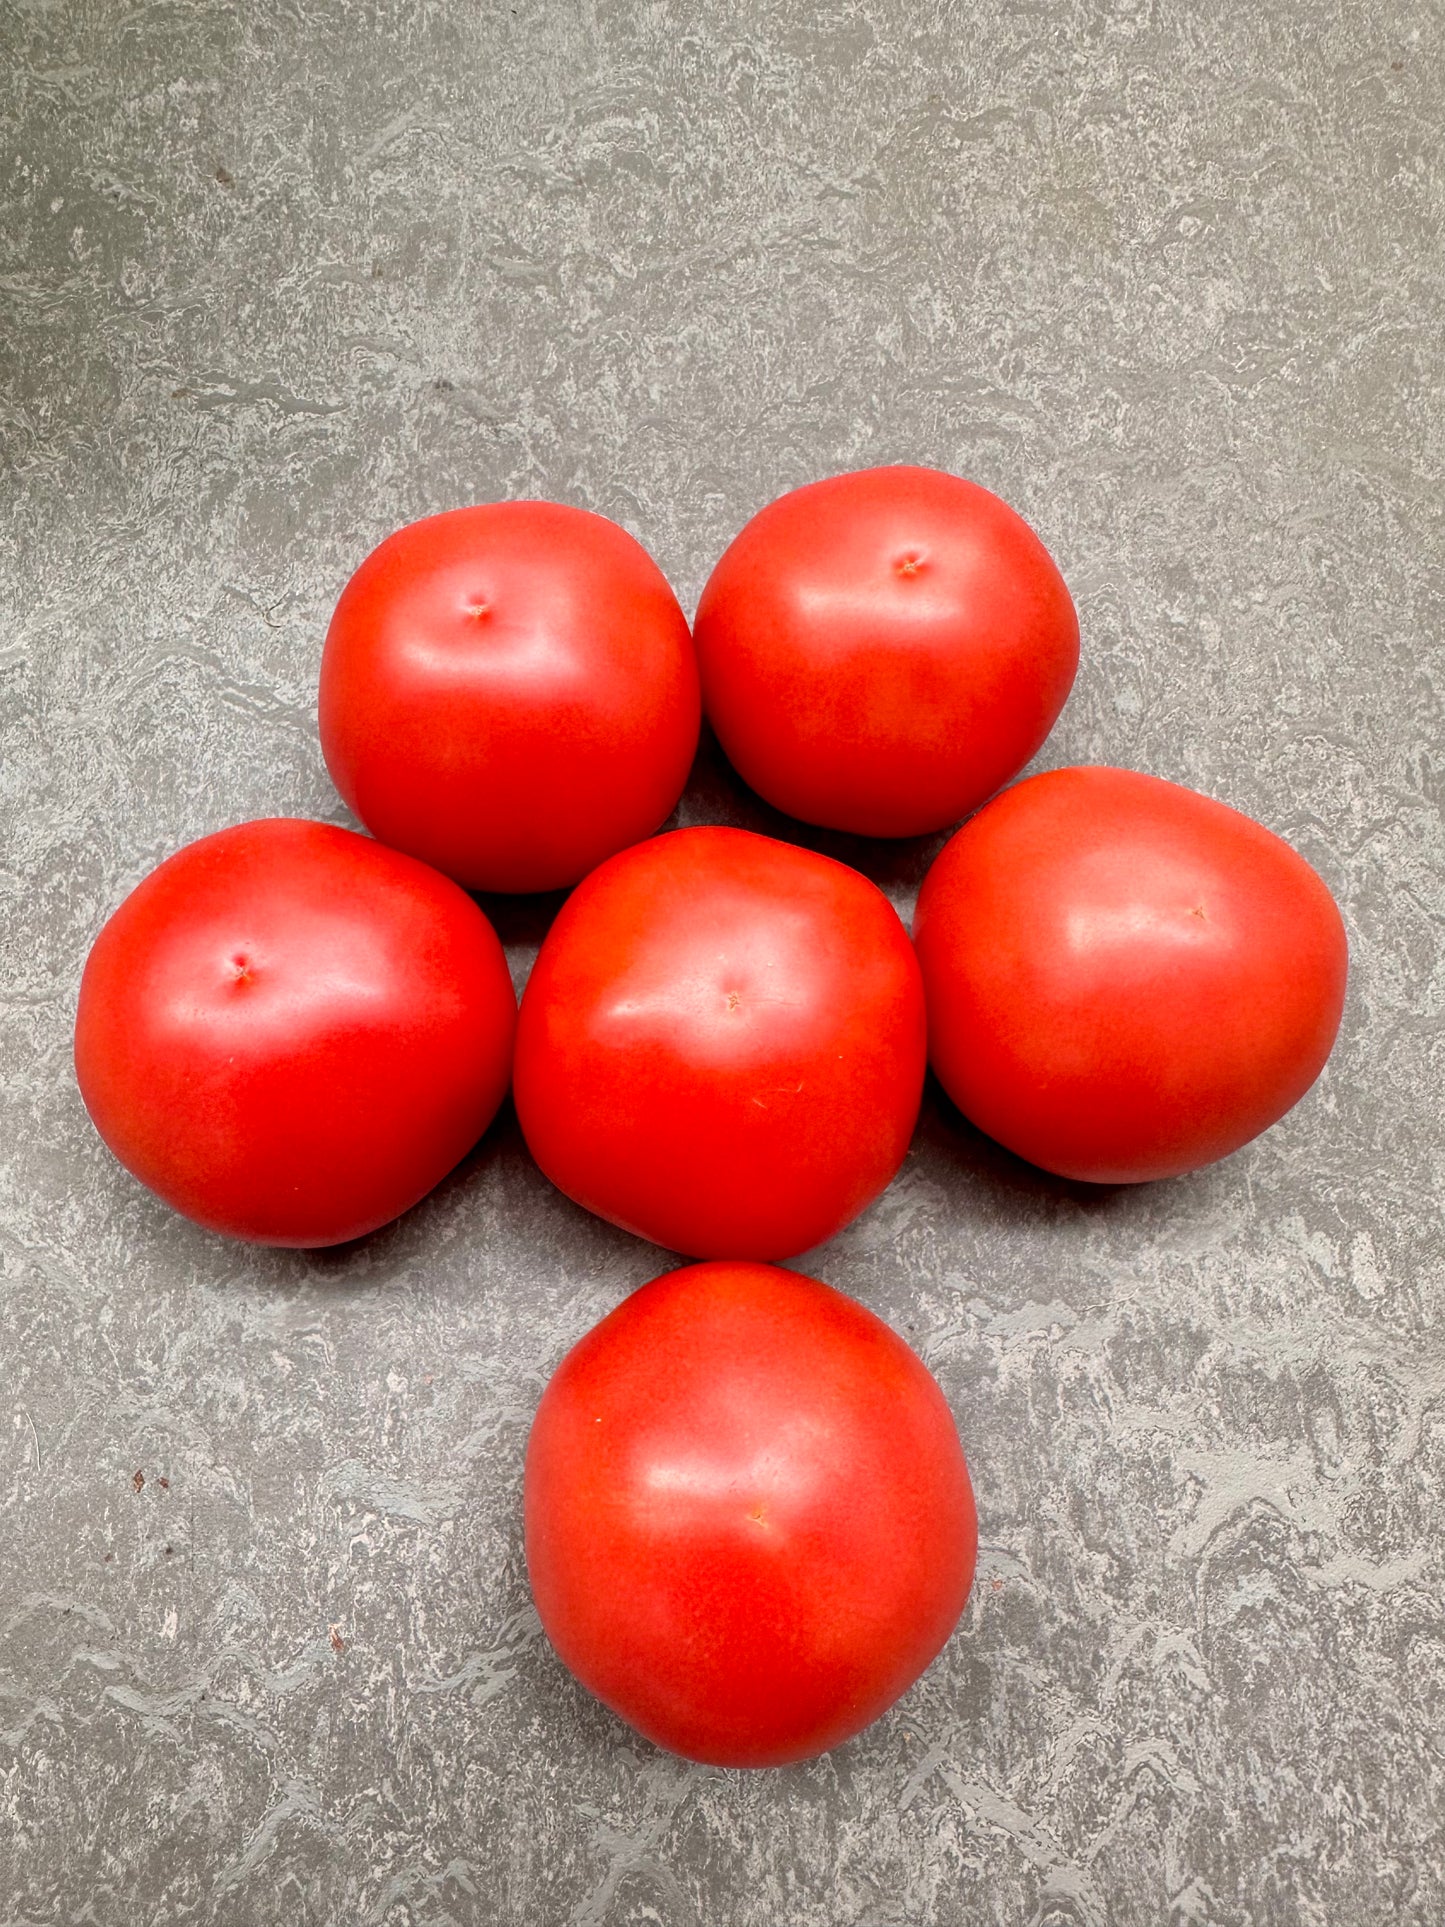 Tomatoes- Beekist @ 3 for $3.00 Large